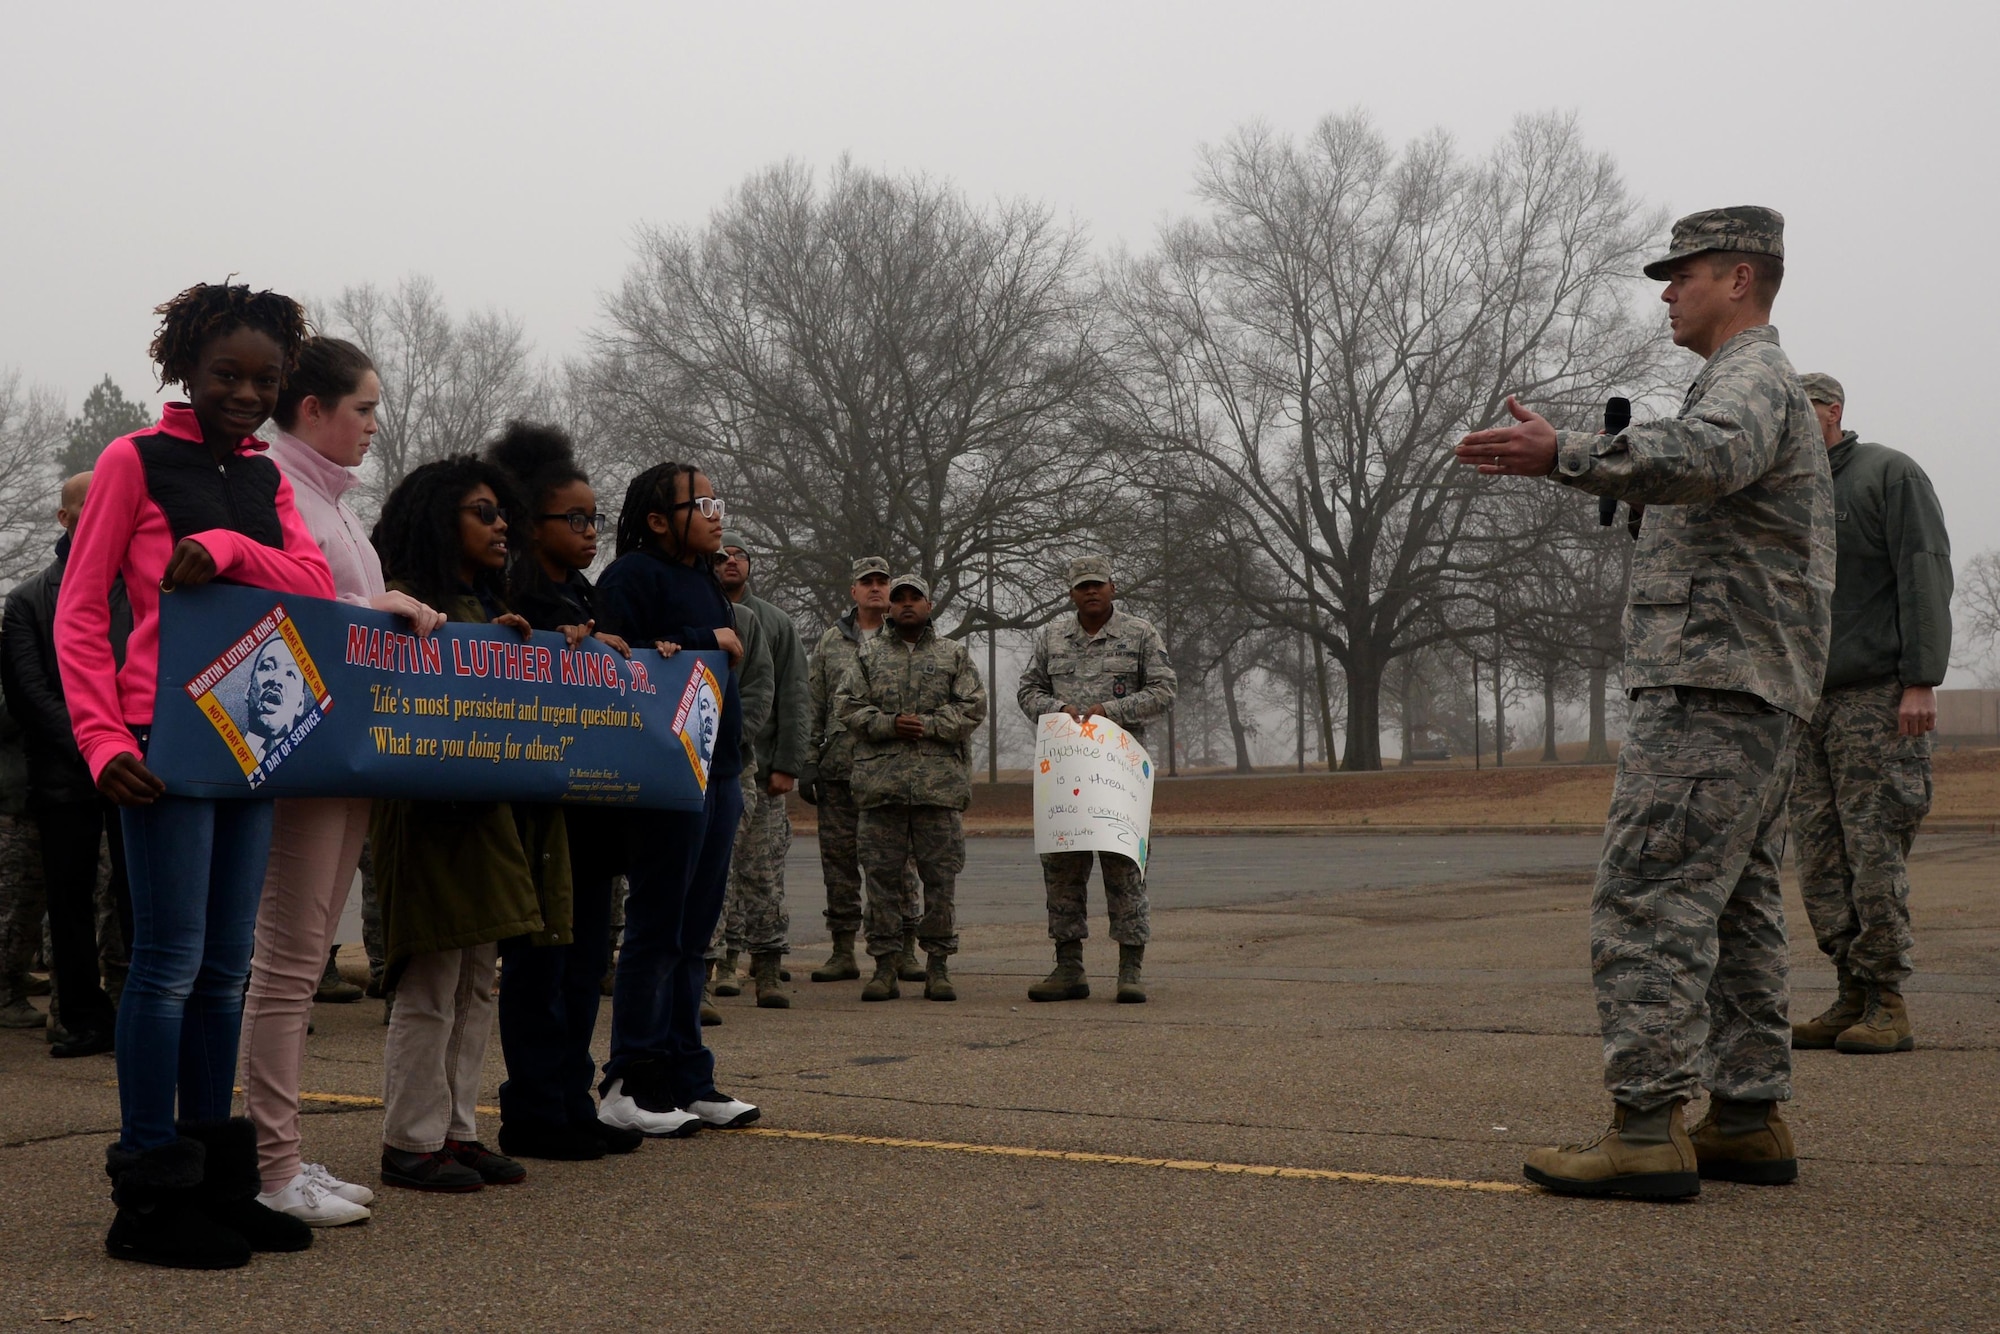 U.S. Air Force Col. Charles Brown, 19th Airlift Wing commander, kicked off the Martin Luther King Jr. commemorative walk with opening remarks January 13, 2017, at Little Rock Air Force Base, Ark. The event began at the Herk Hall and participants marched to the nearby Walters Community Support Center. (U.S. Air Force photo by Airman 1st Class Codie Collins) 